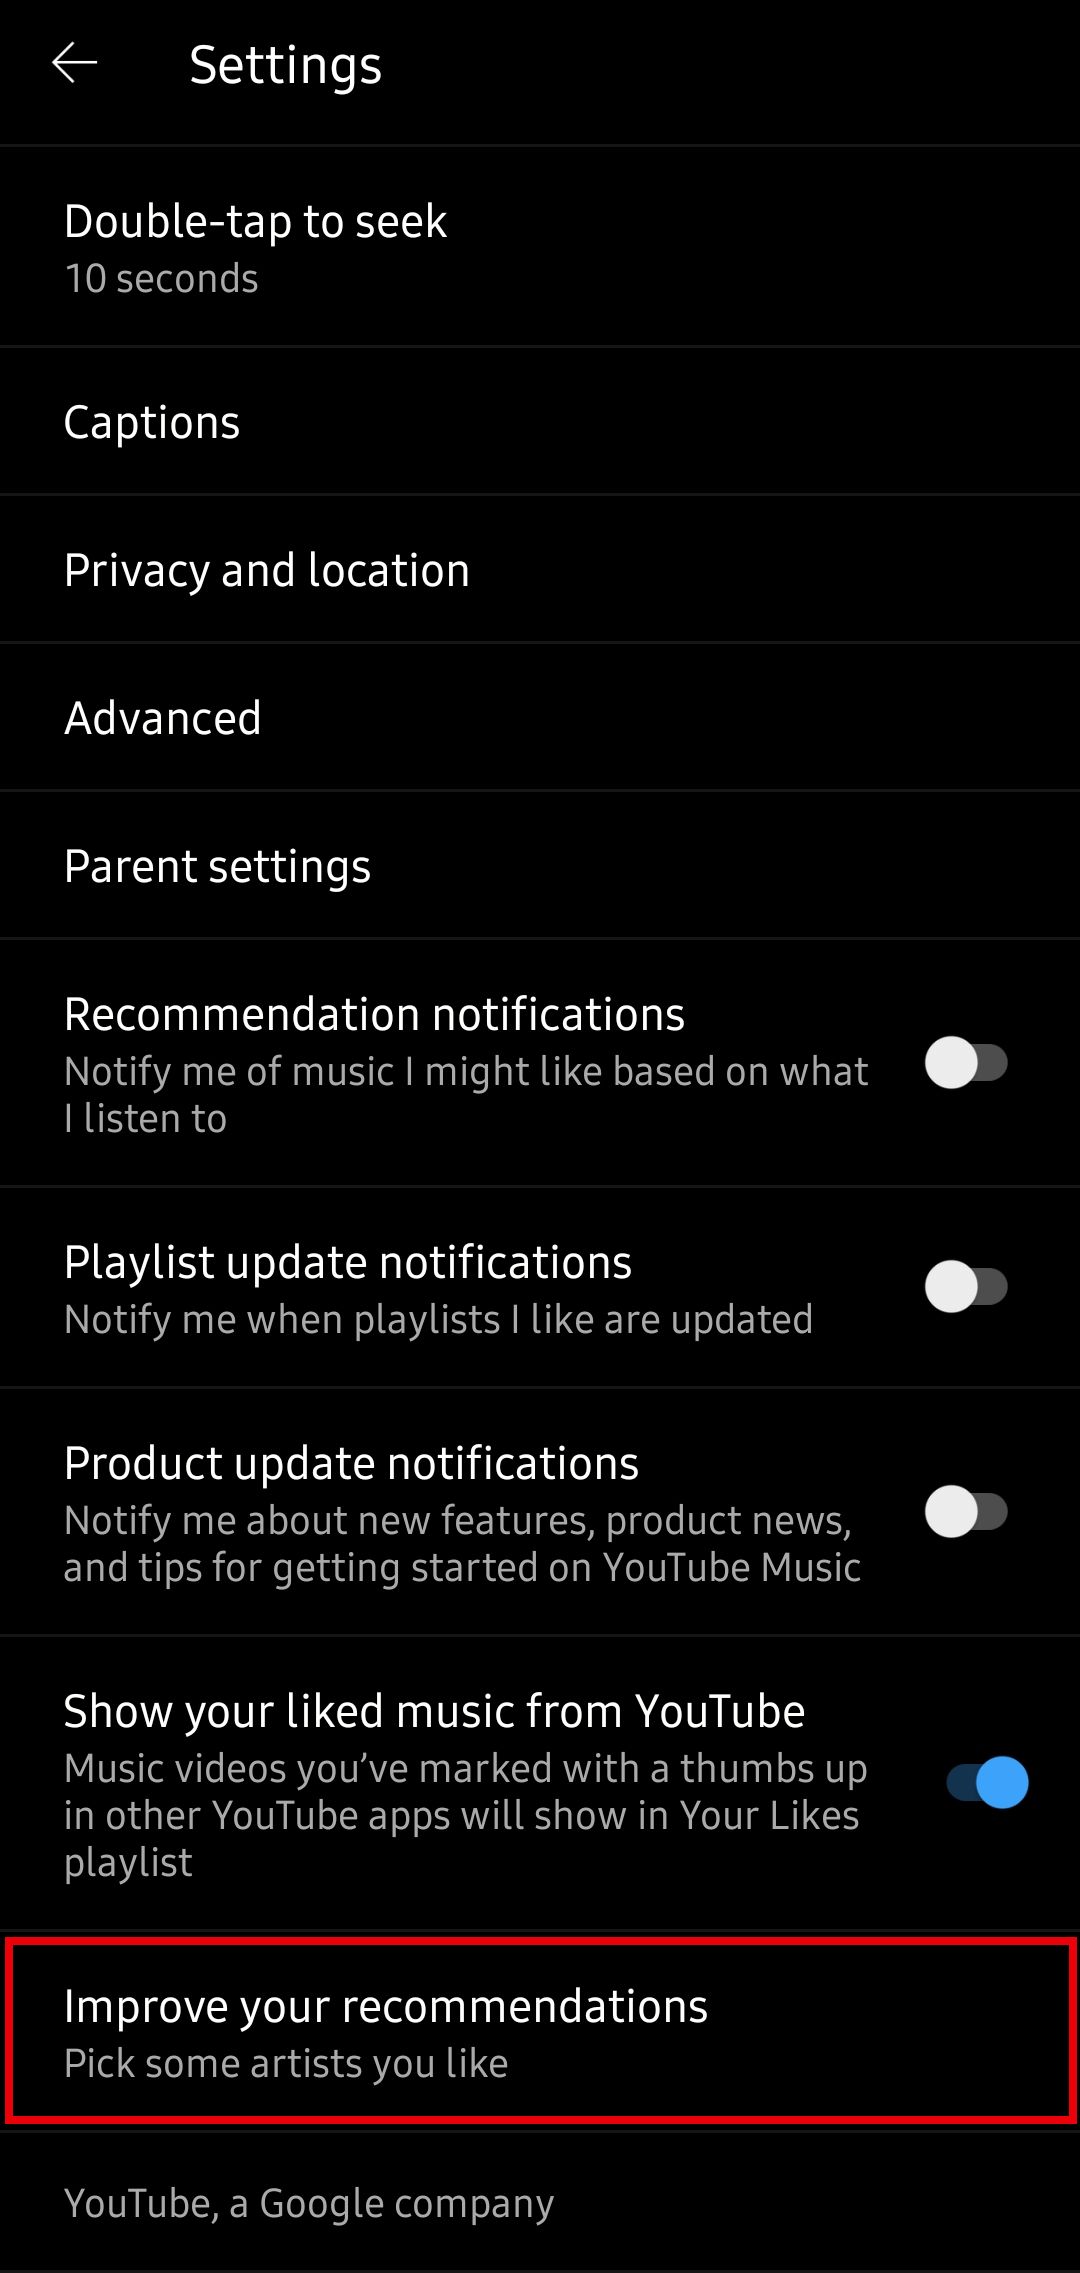 youtube music settings page with the option to improve your recommendations highlighted